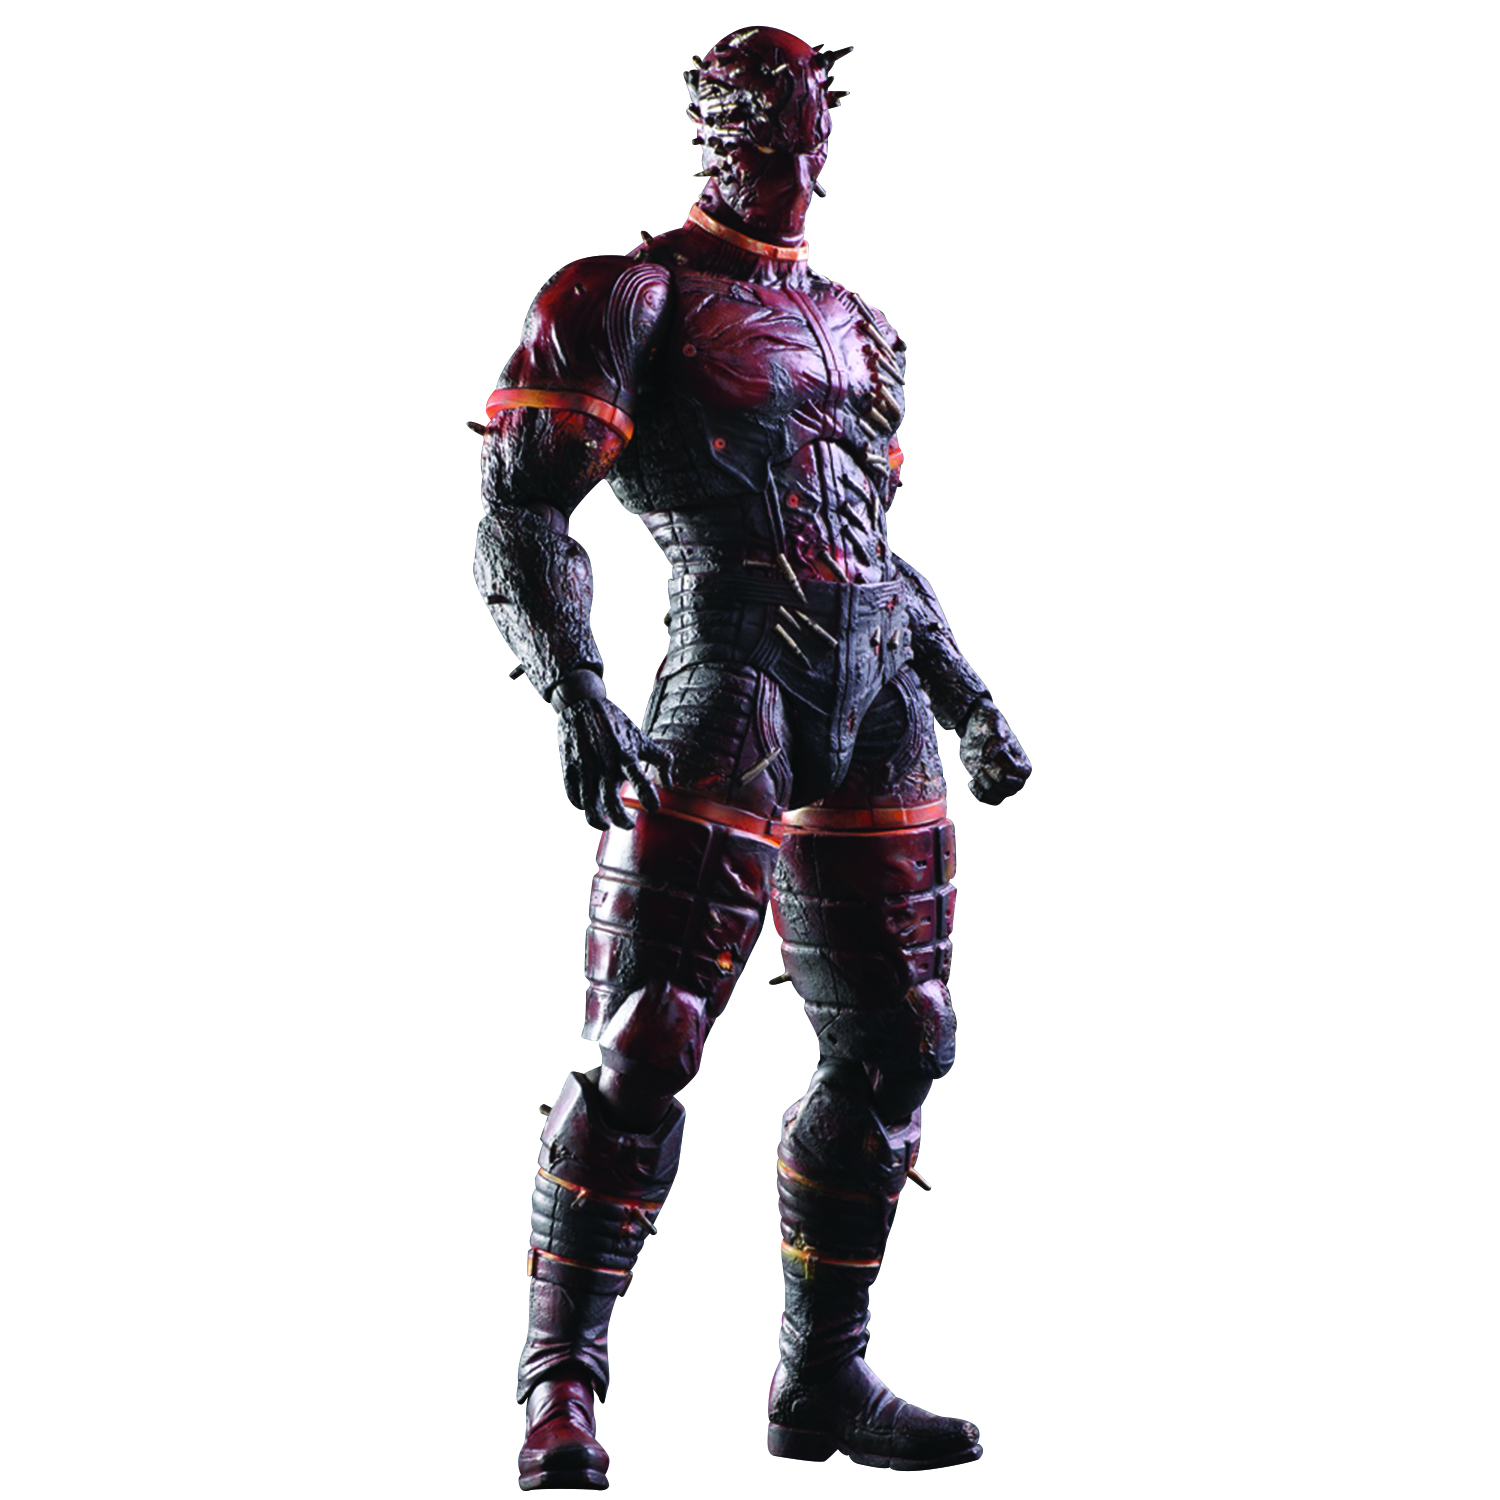 Metal Gear Solid V- The Phantom Pain: The Man on Fire (Play Arts Kai Action Figure) 